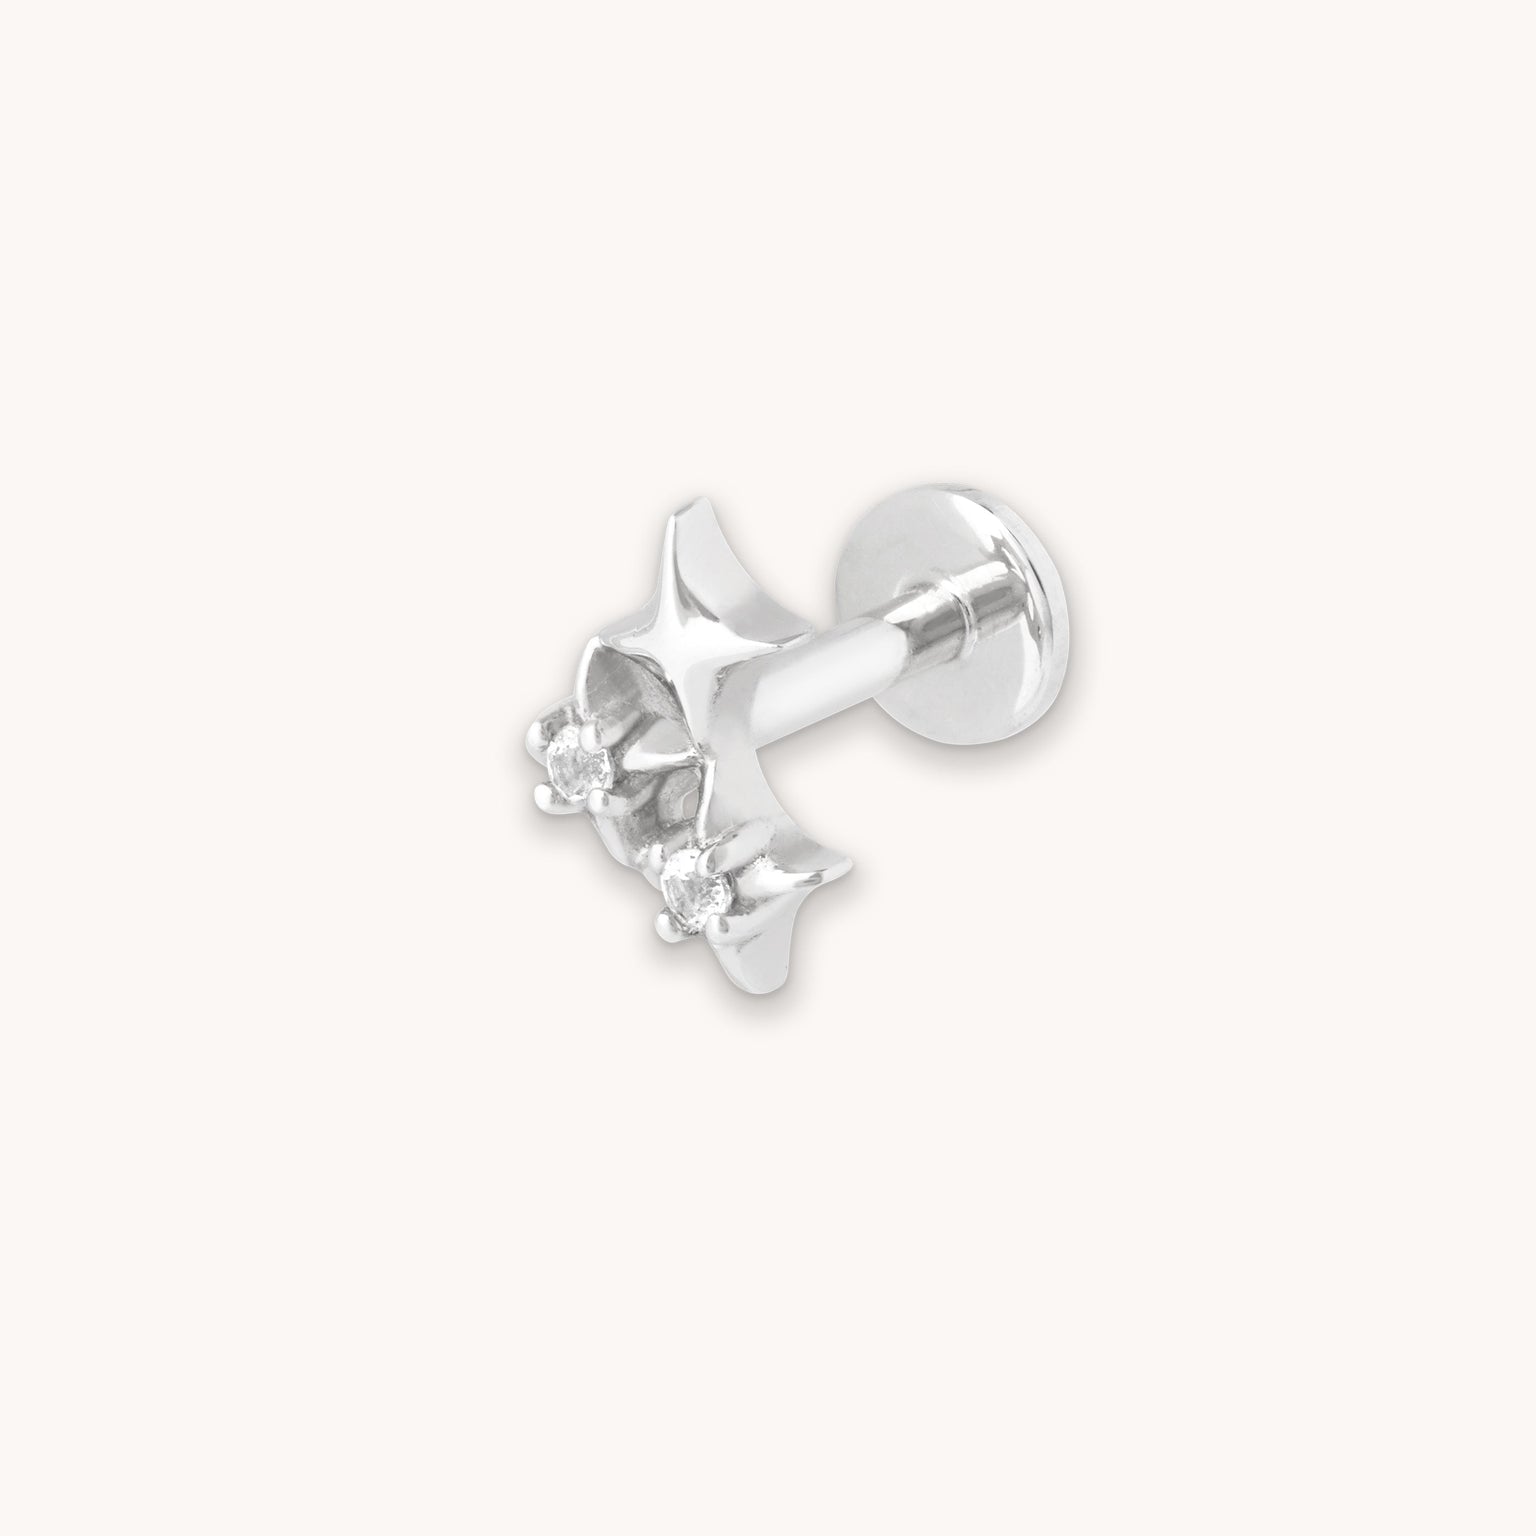 Cluster Star Piercing Stud in Solid White Gold